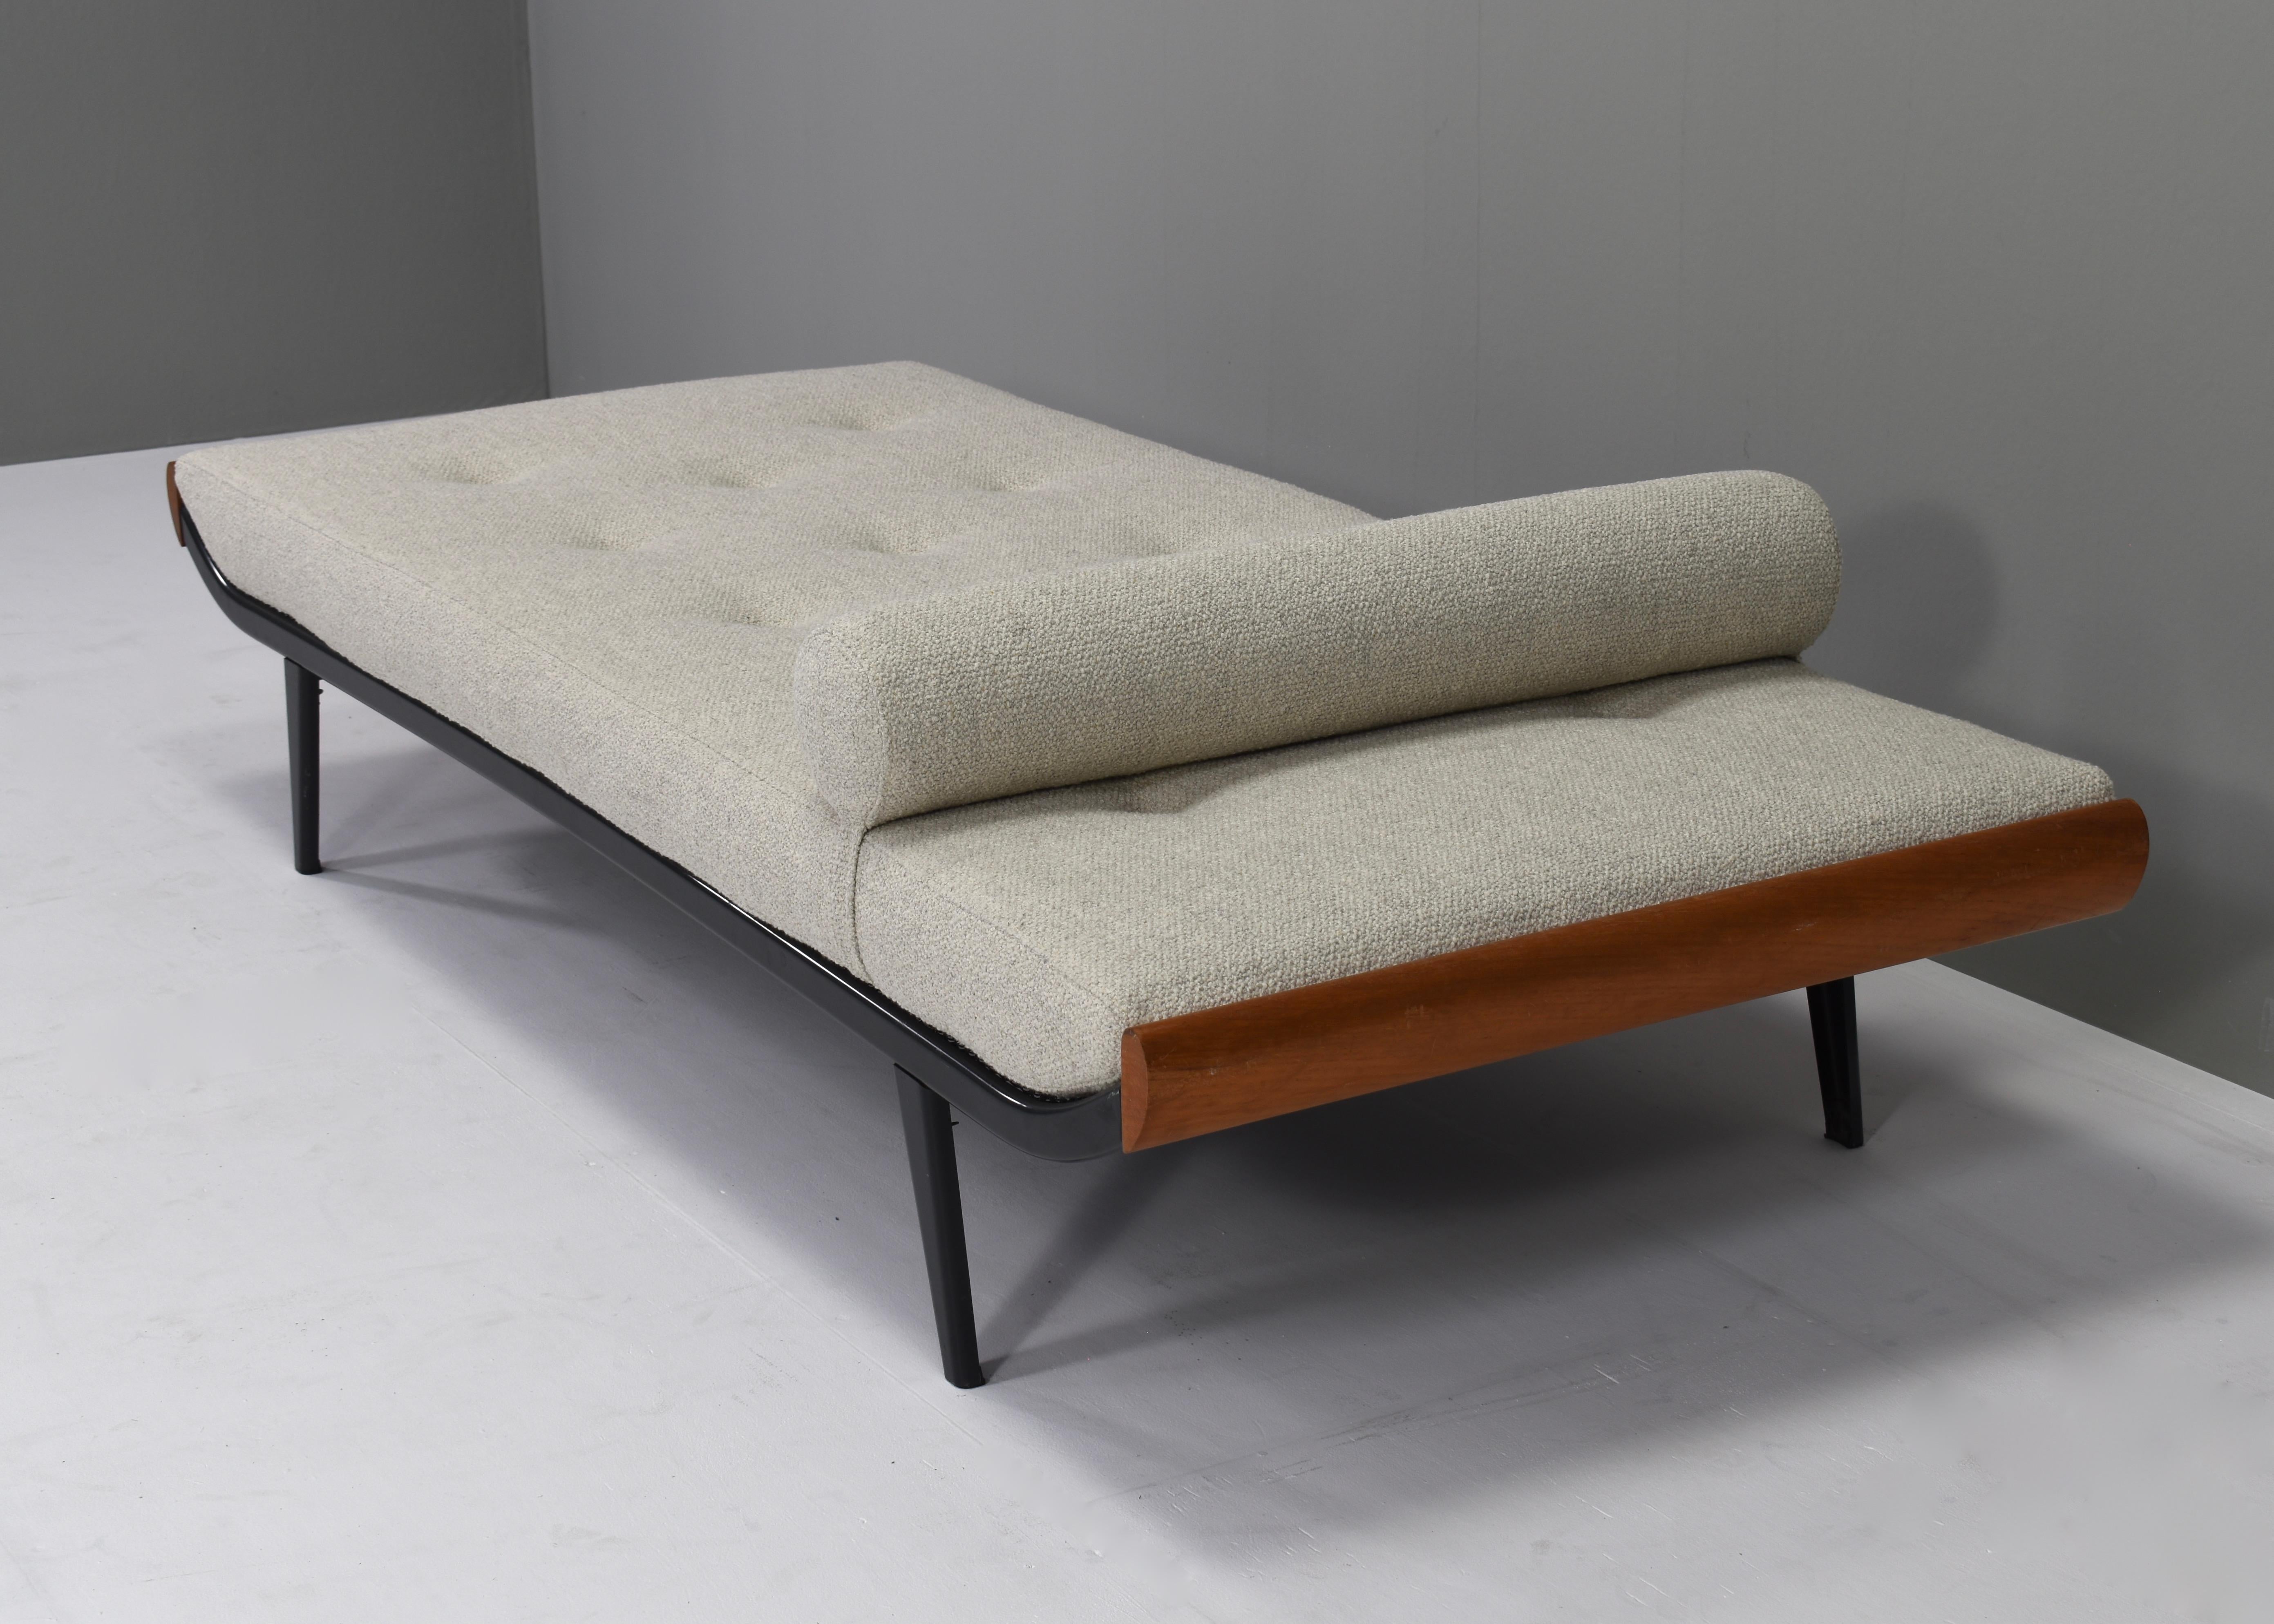 Dutch Cleopatra Daybed Designed by Cordemeijer for Auping, Netherlands, 1954